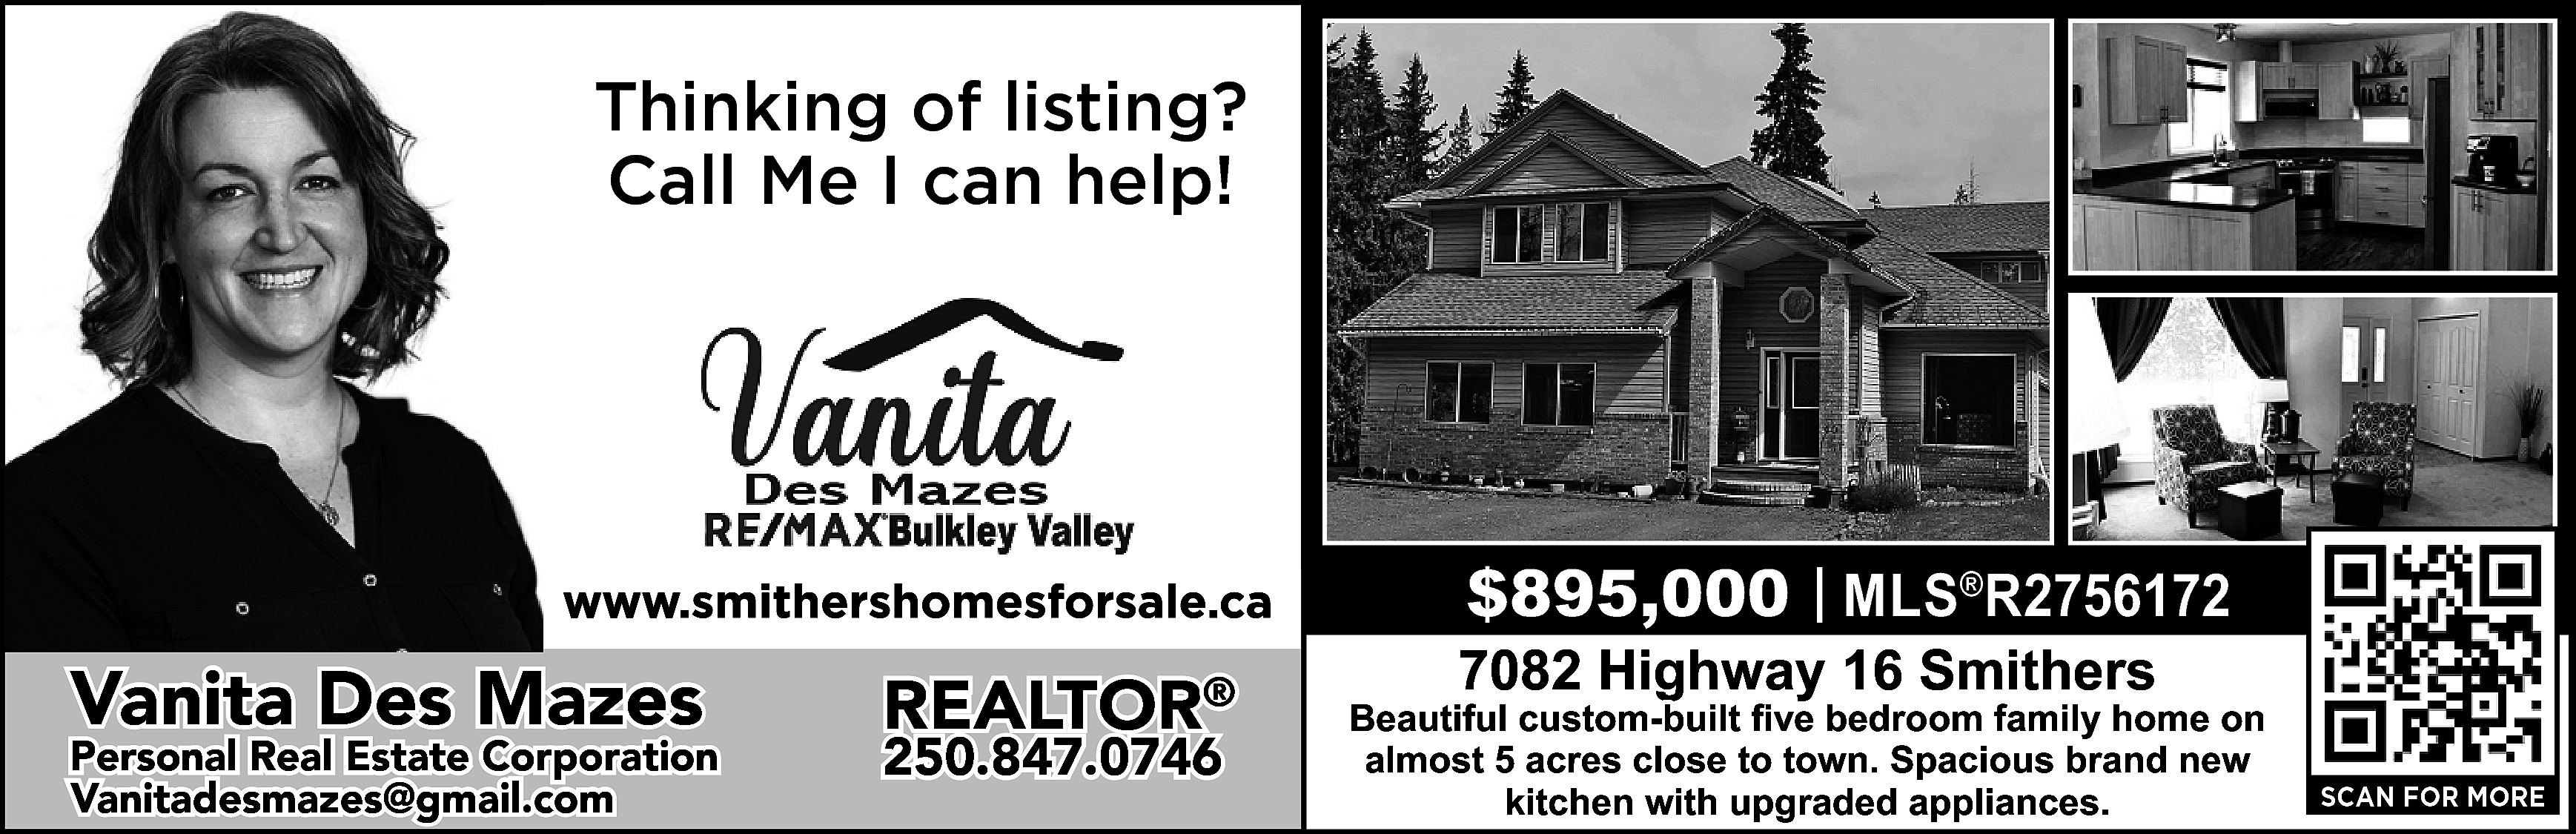 Thinking of listing? <br>Call Me  Thinking of listing?  Call Me I can help!    https://www.smithershomesforsale.ca/    Vanita Des Mazes    Personal Real Estate Corporation  vanitadesmazes@gmail.com  Vanitadesmazes@gmail.com    REALTOR®  250.847.0746    $895,000 | MLS®R2756172    7082 Highway 16 Smithers    Beautiful custom-built five bedroom family home on  almost 5 acres close to town. Spacious brand new  kitchen with upgraded appliances.    SCAN FOR MORE    